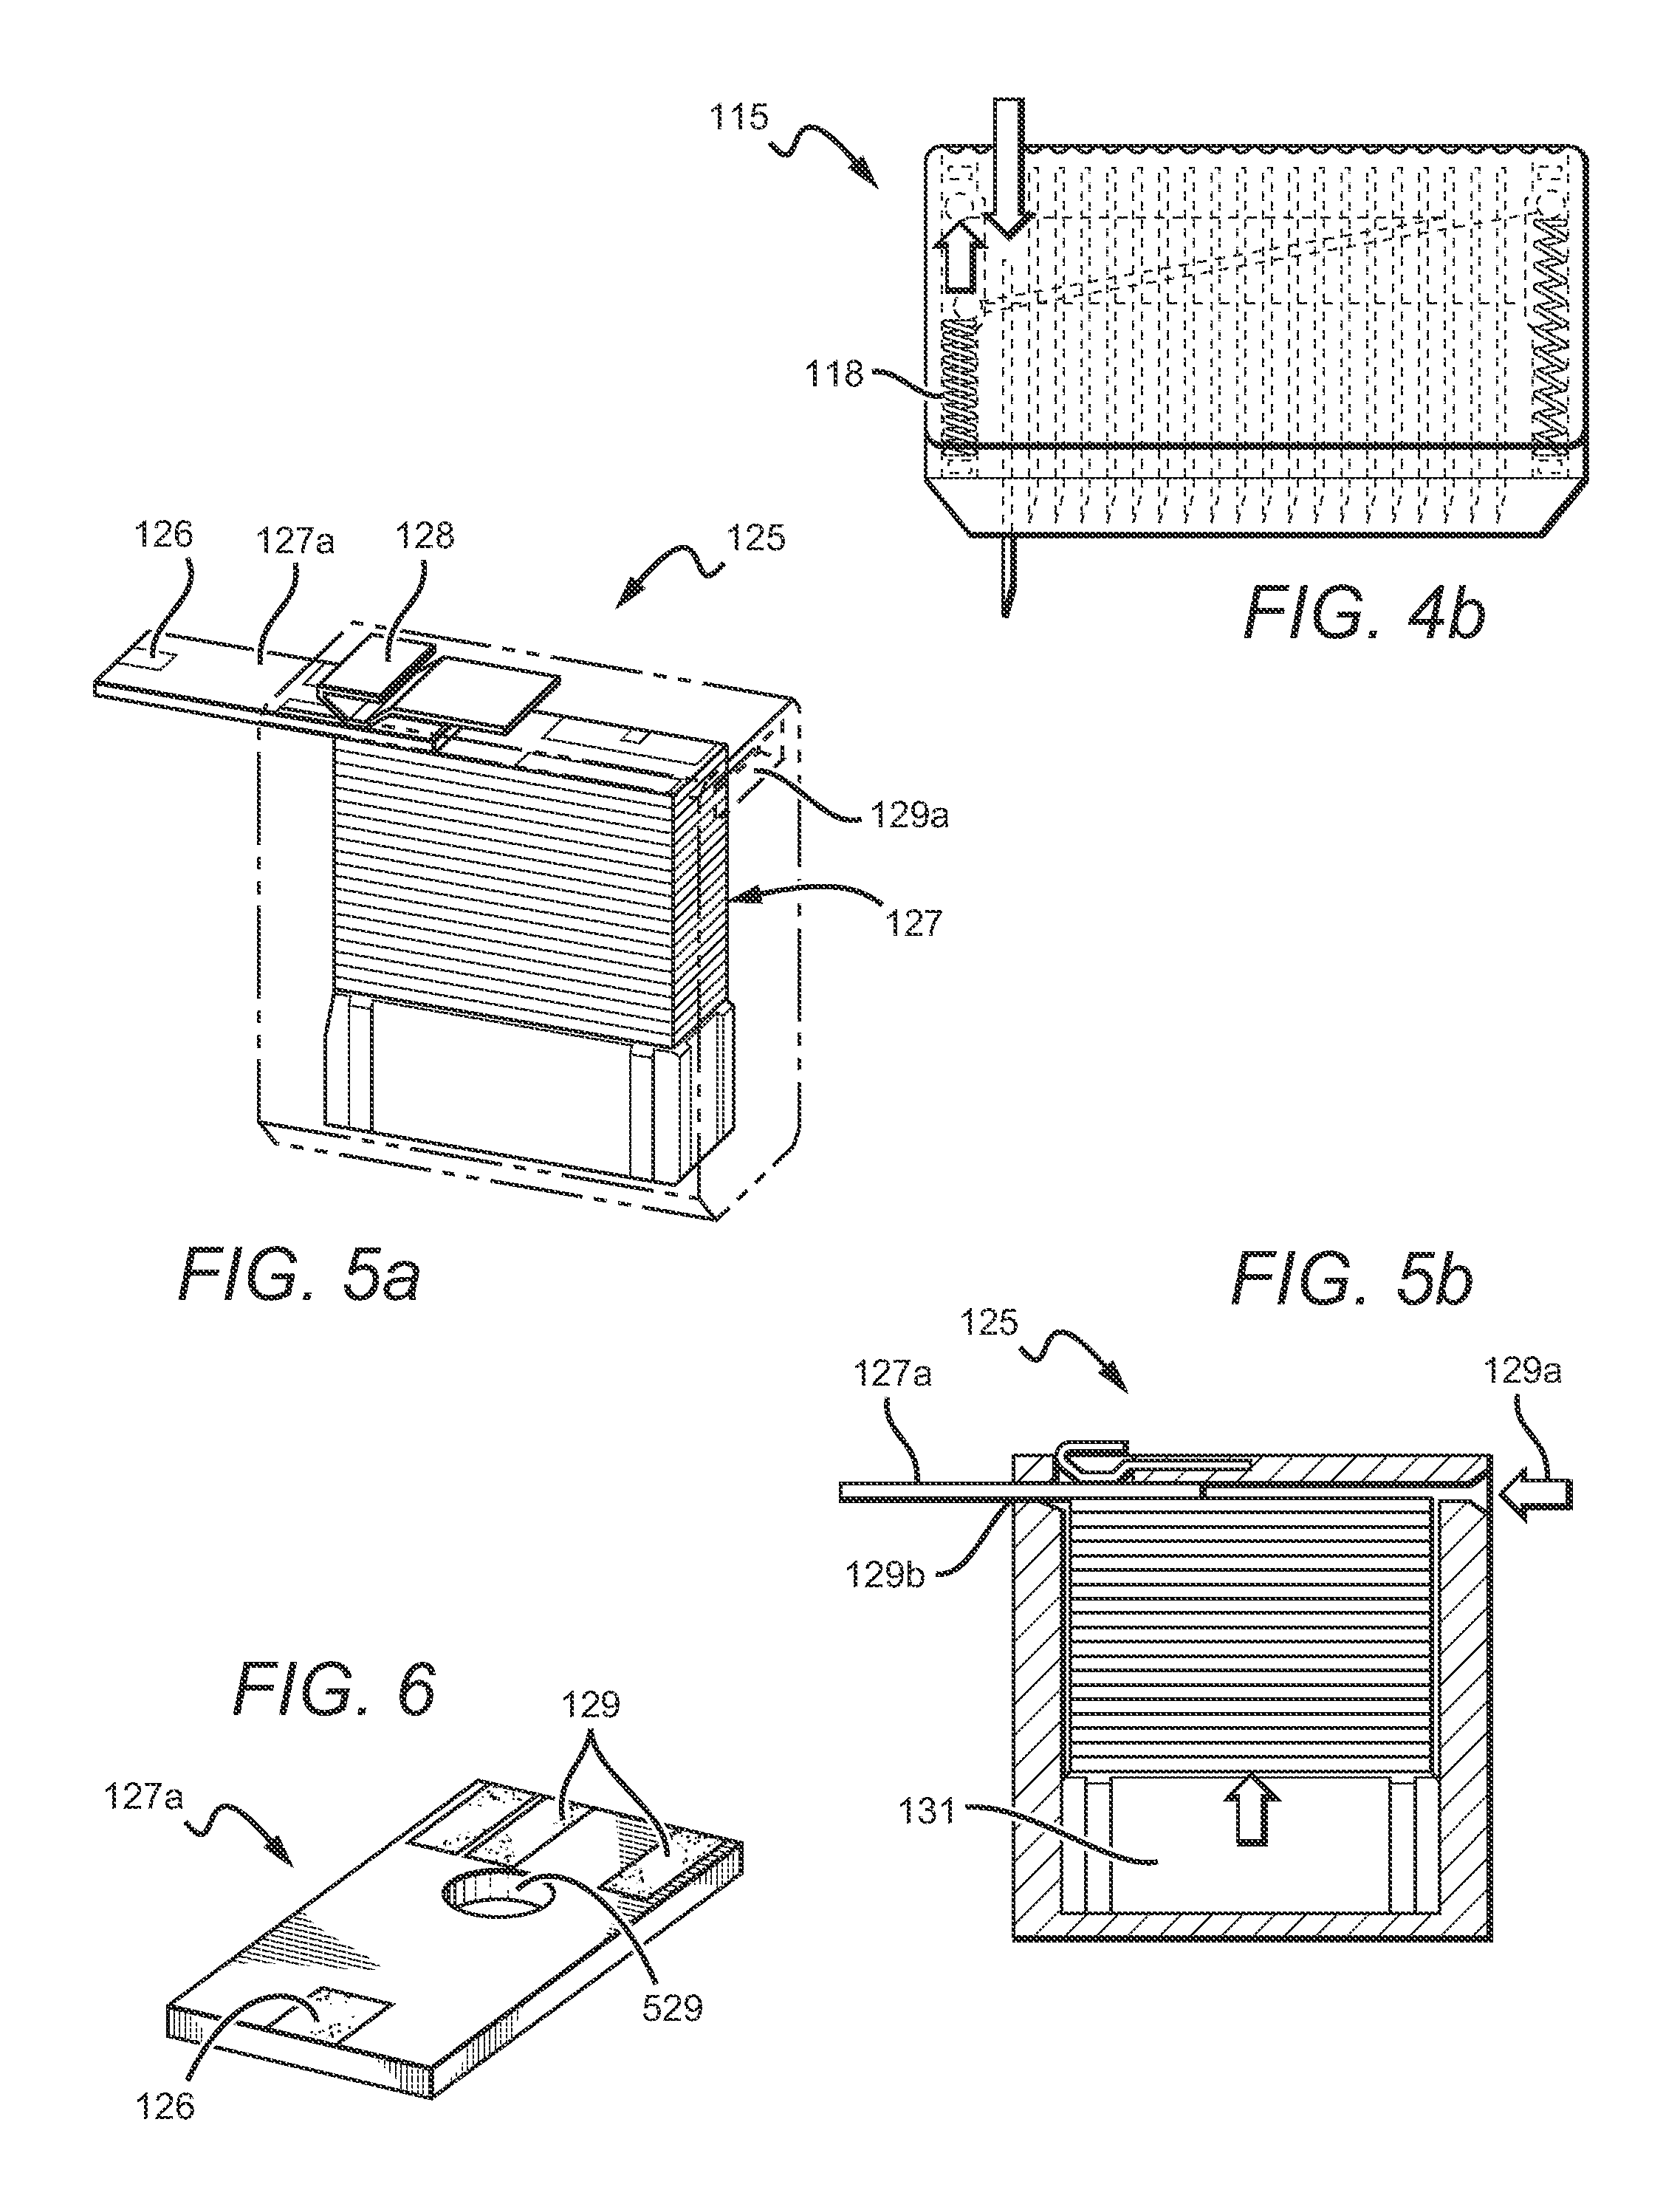 Analyte Testing Device with Lancet Cartridge and Test Strip Cartridge